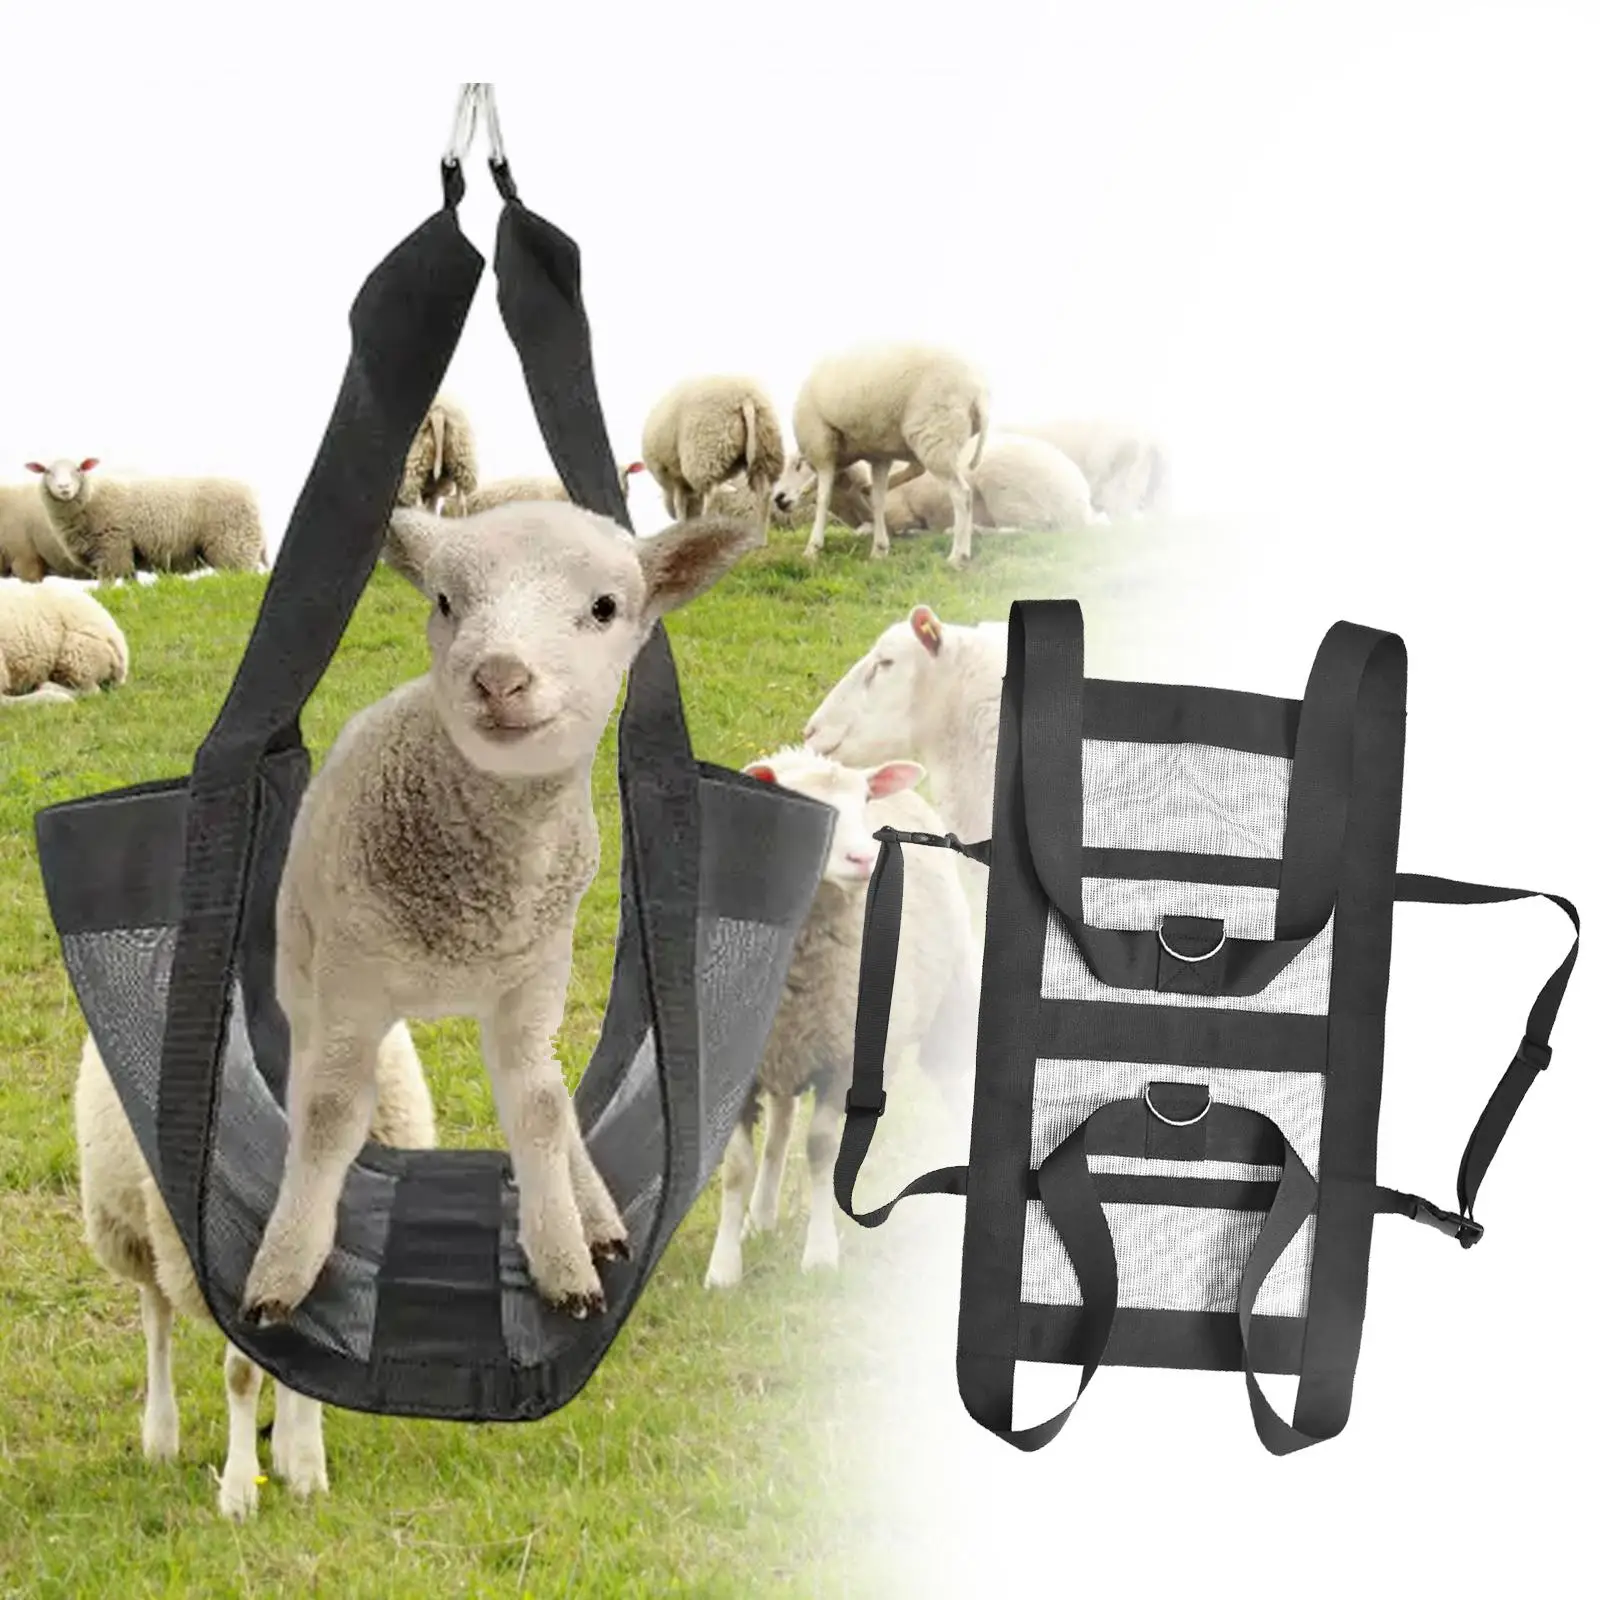 Calf Sling for Weighing Small Animals for Pigs Calves Newborn Farm Animals